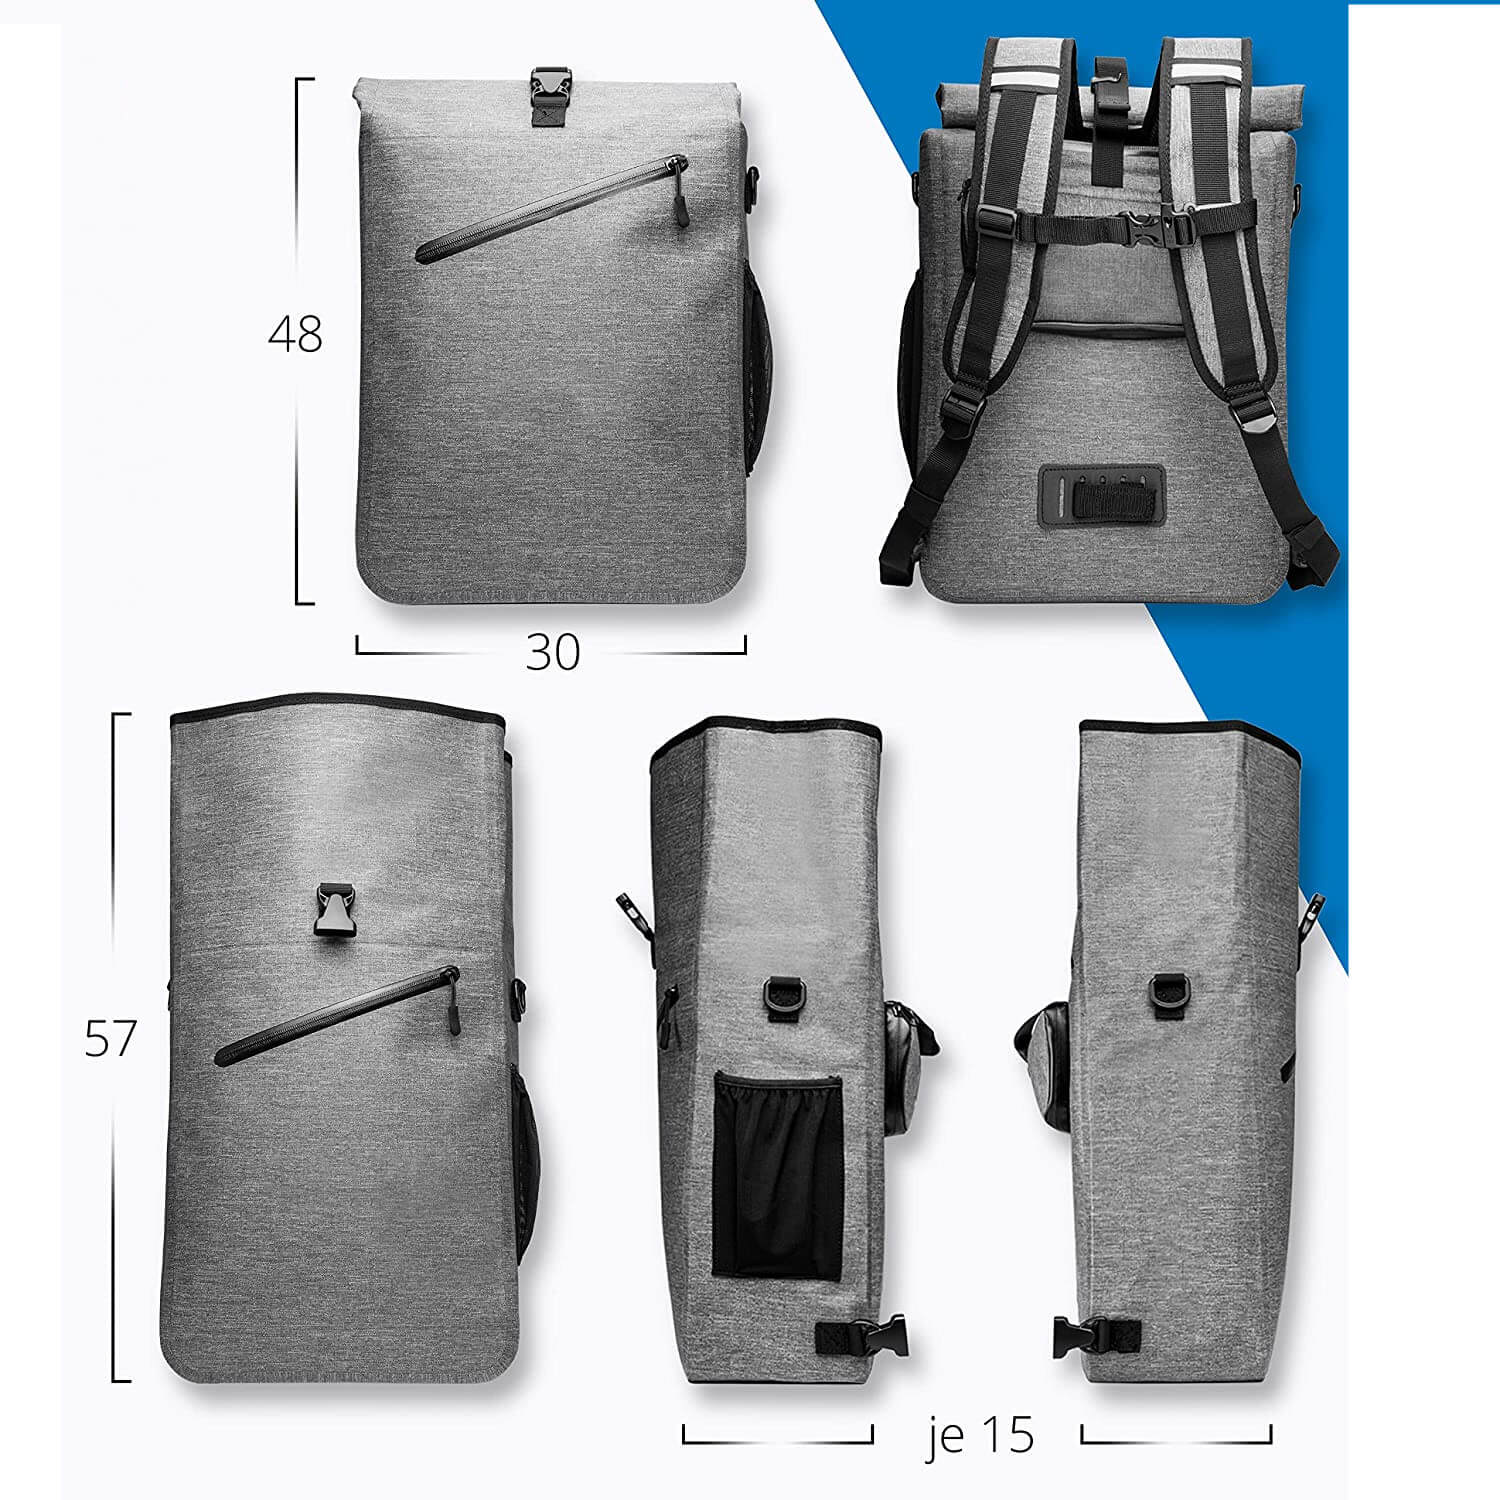 Multifunction Roll Top Bicycle Pannier Bags